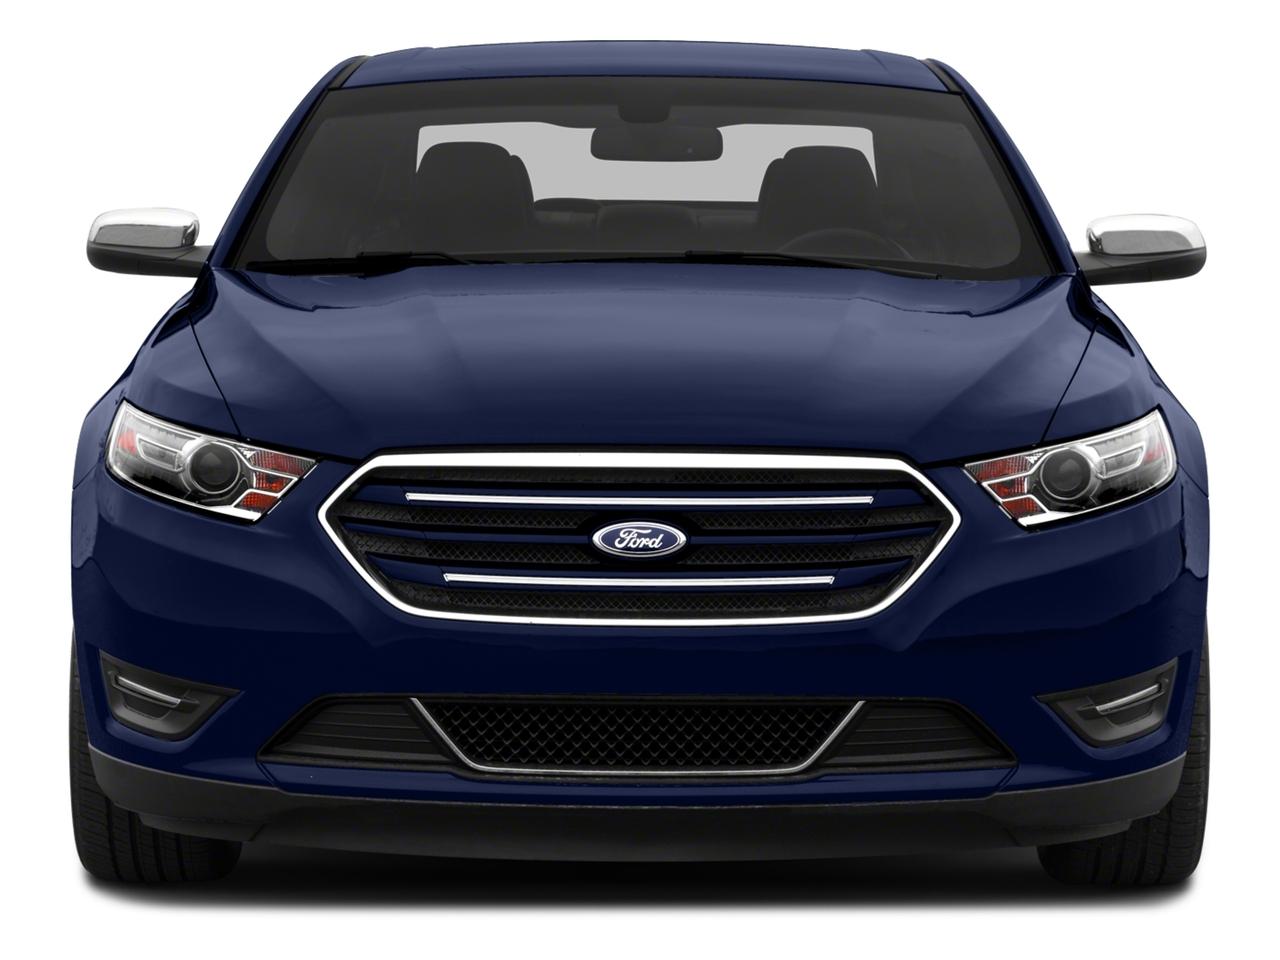 Ford fwd. Ford Taurus 2014. Форд Таурус 2014. Ford Taurus 2015. Ford Taurus 2014 с решеткой спереди.